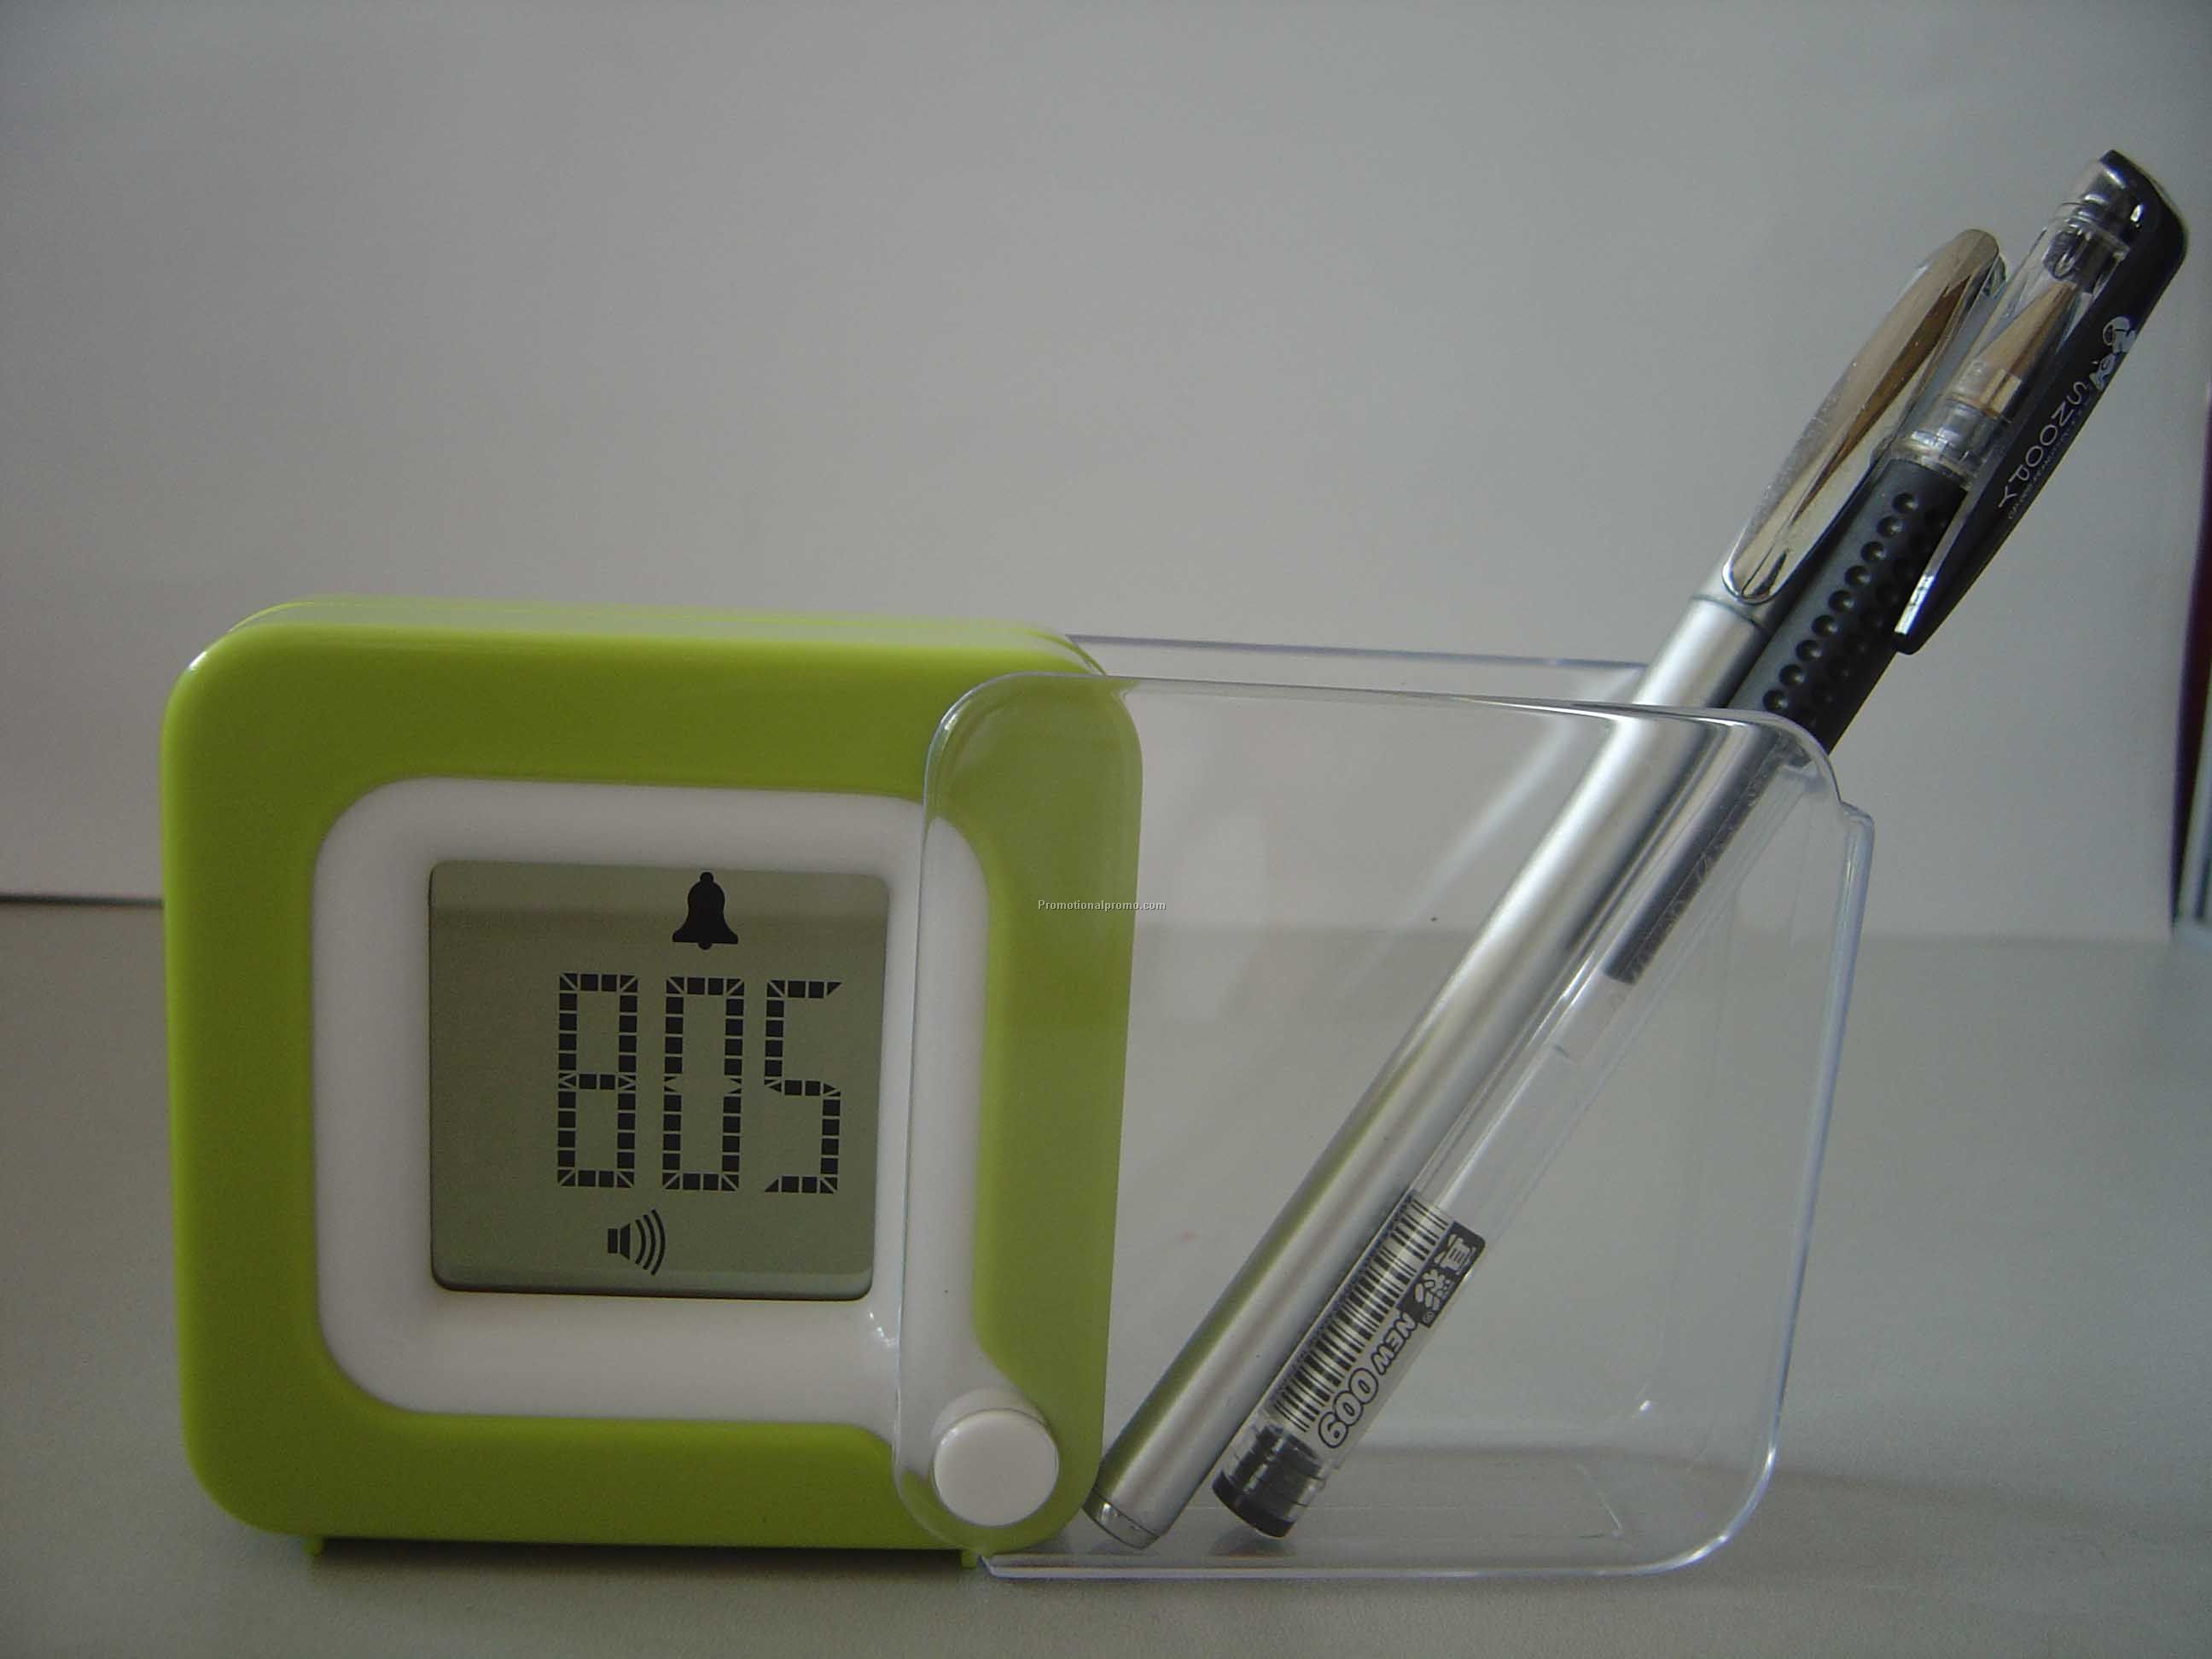 Pen Holder with Clock